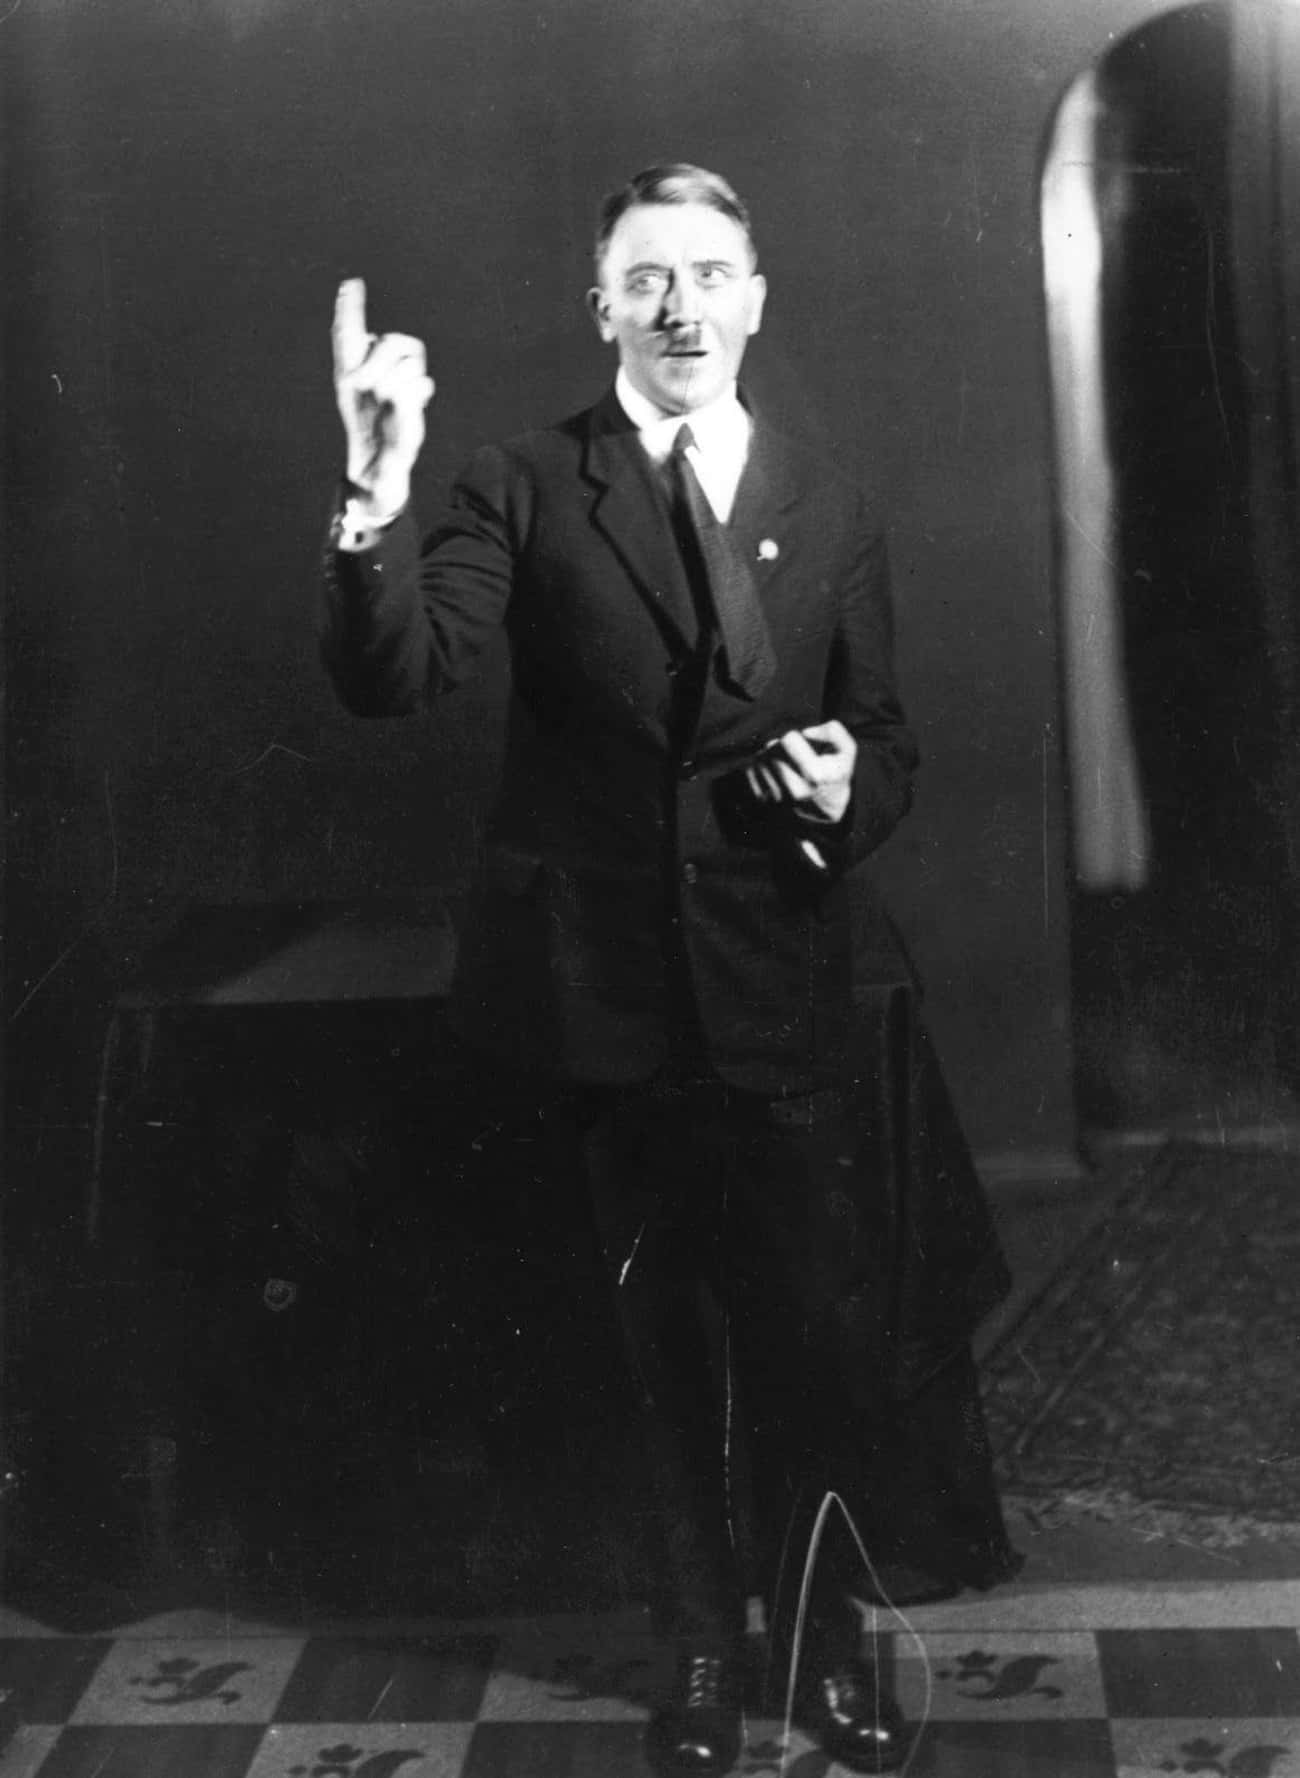 Hitler's Practiced Gestures Helped Him Rise To Power